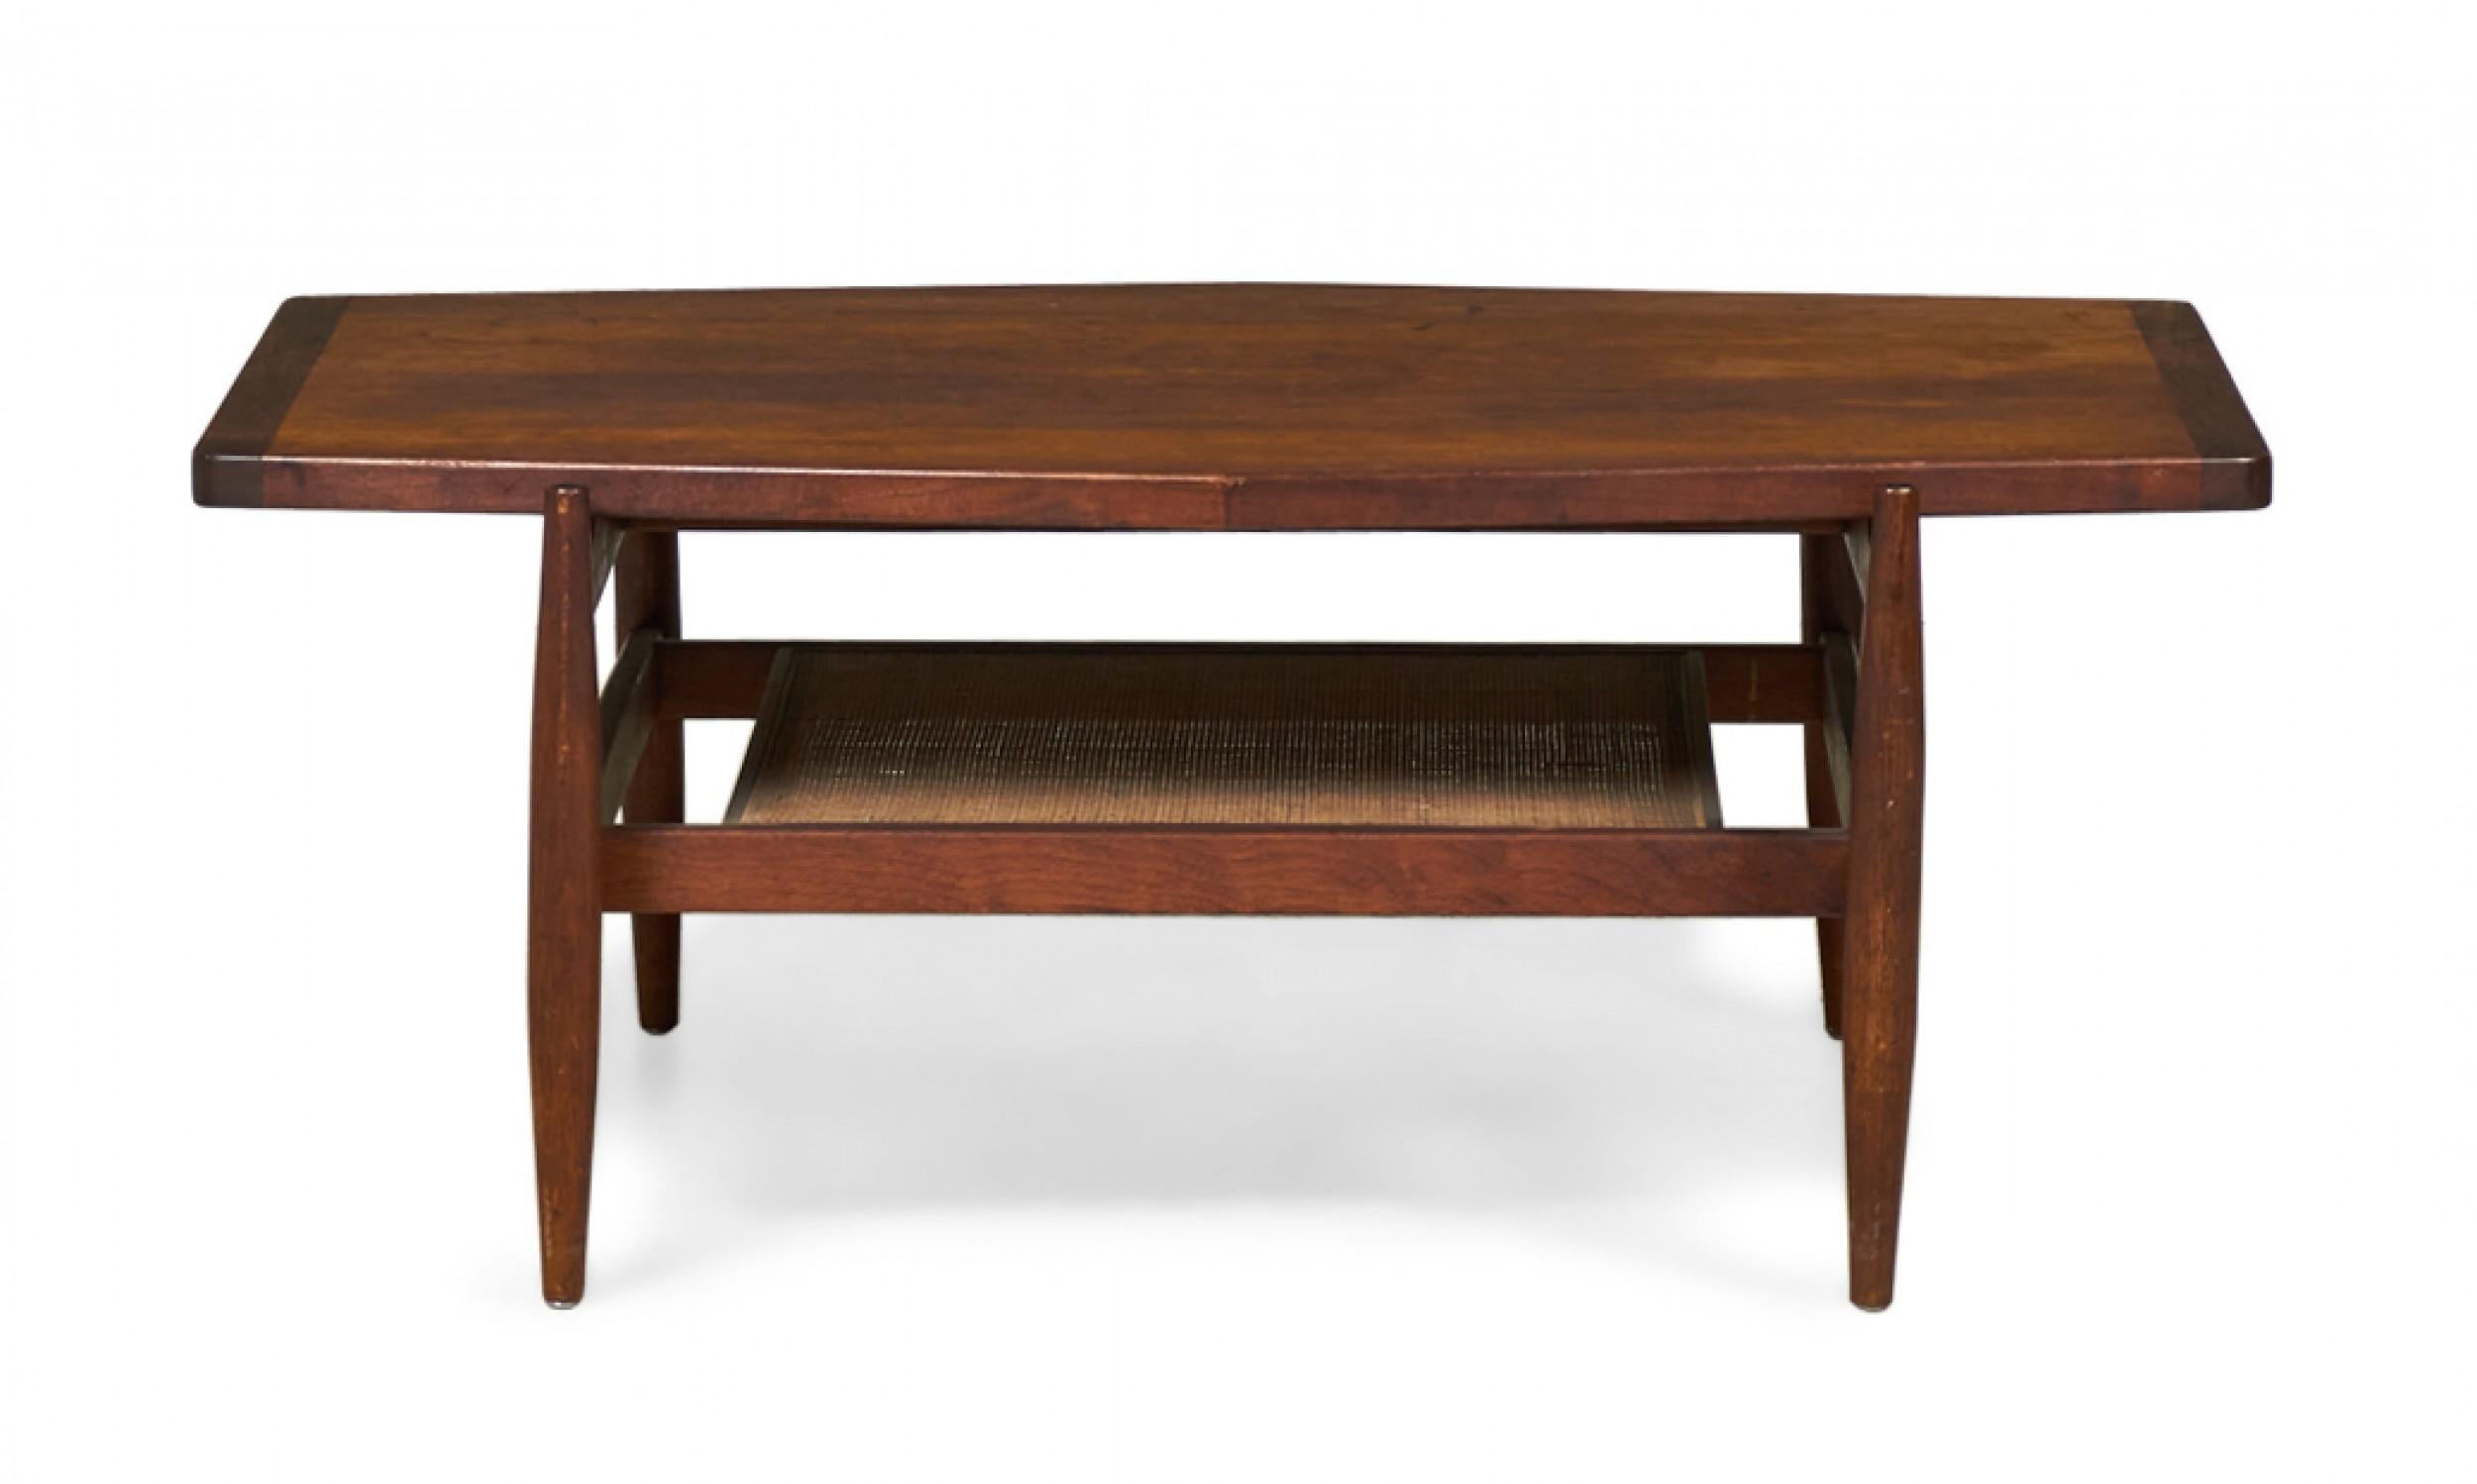 Jens Risom Mid-Century Diamond Top Walnut and Caning Coffee Table For Sale 1